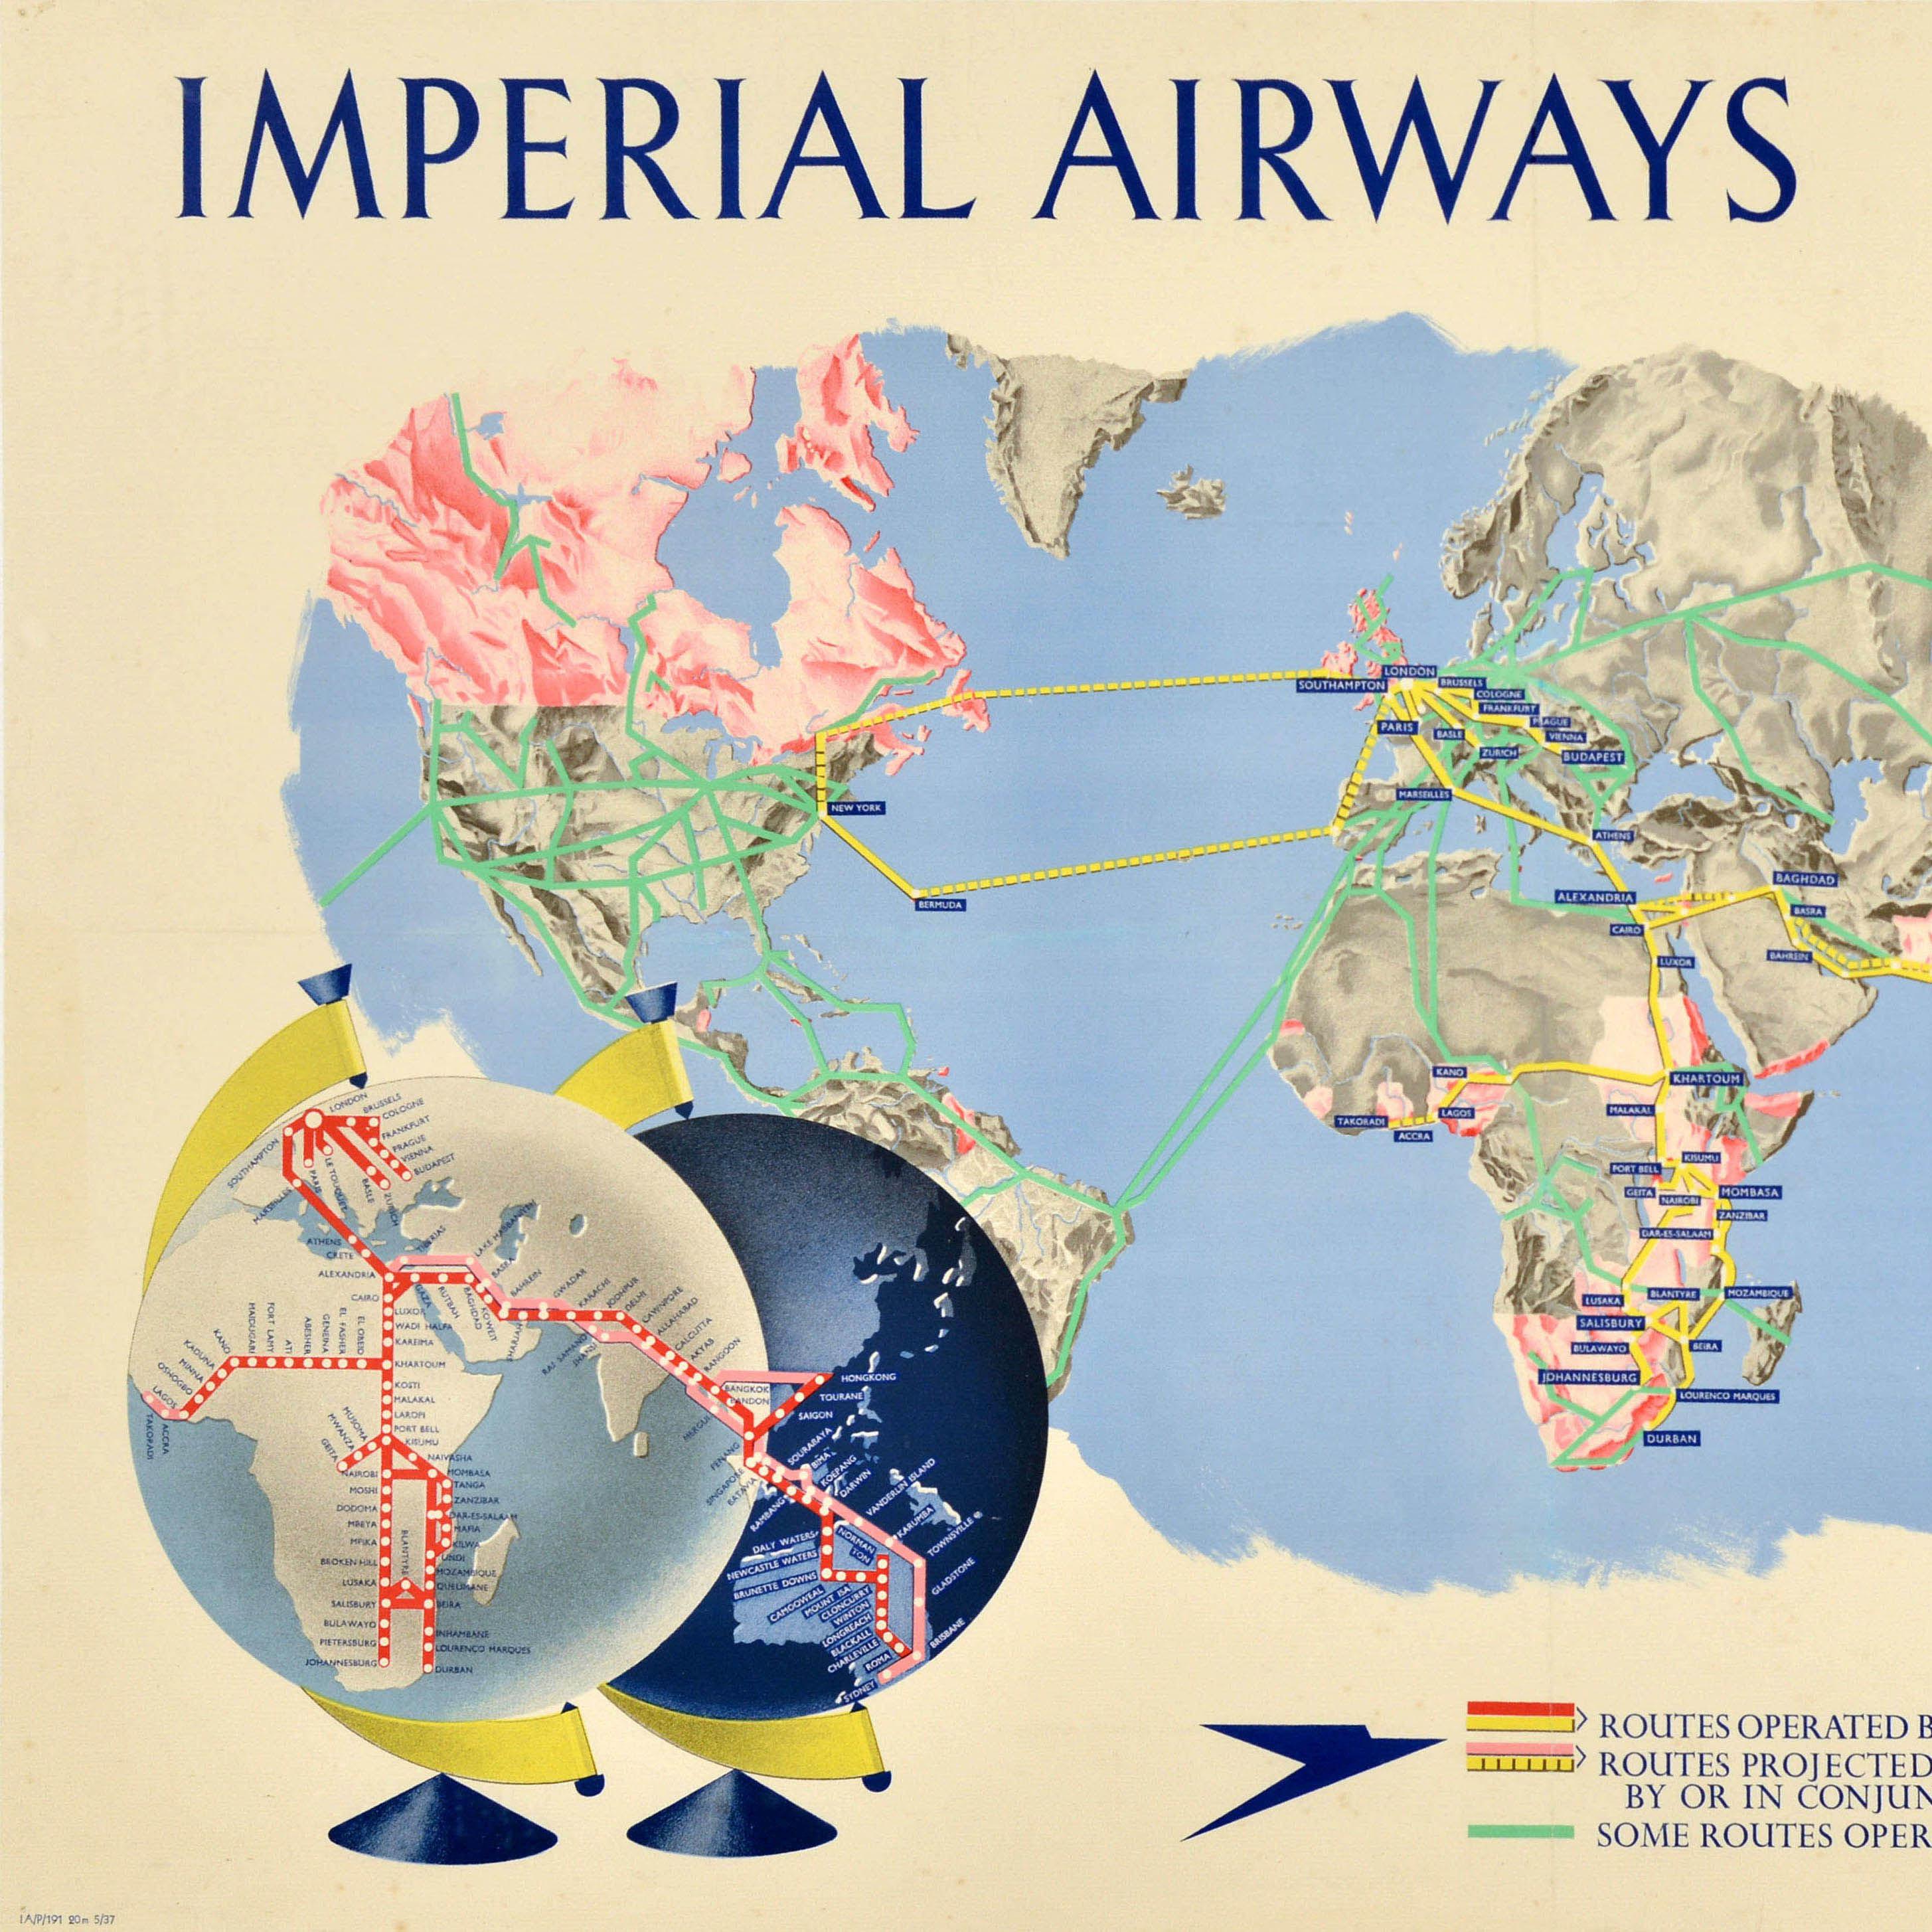 Original Vintage Travel Poster Imperial Airways Routes Ensign Empire Flying Boat - Print by James Gardner